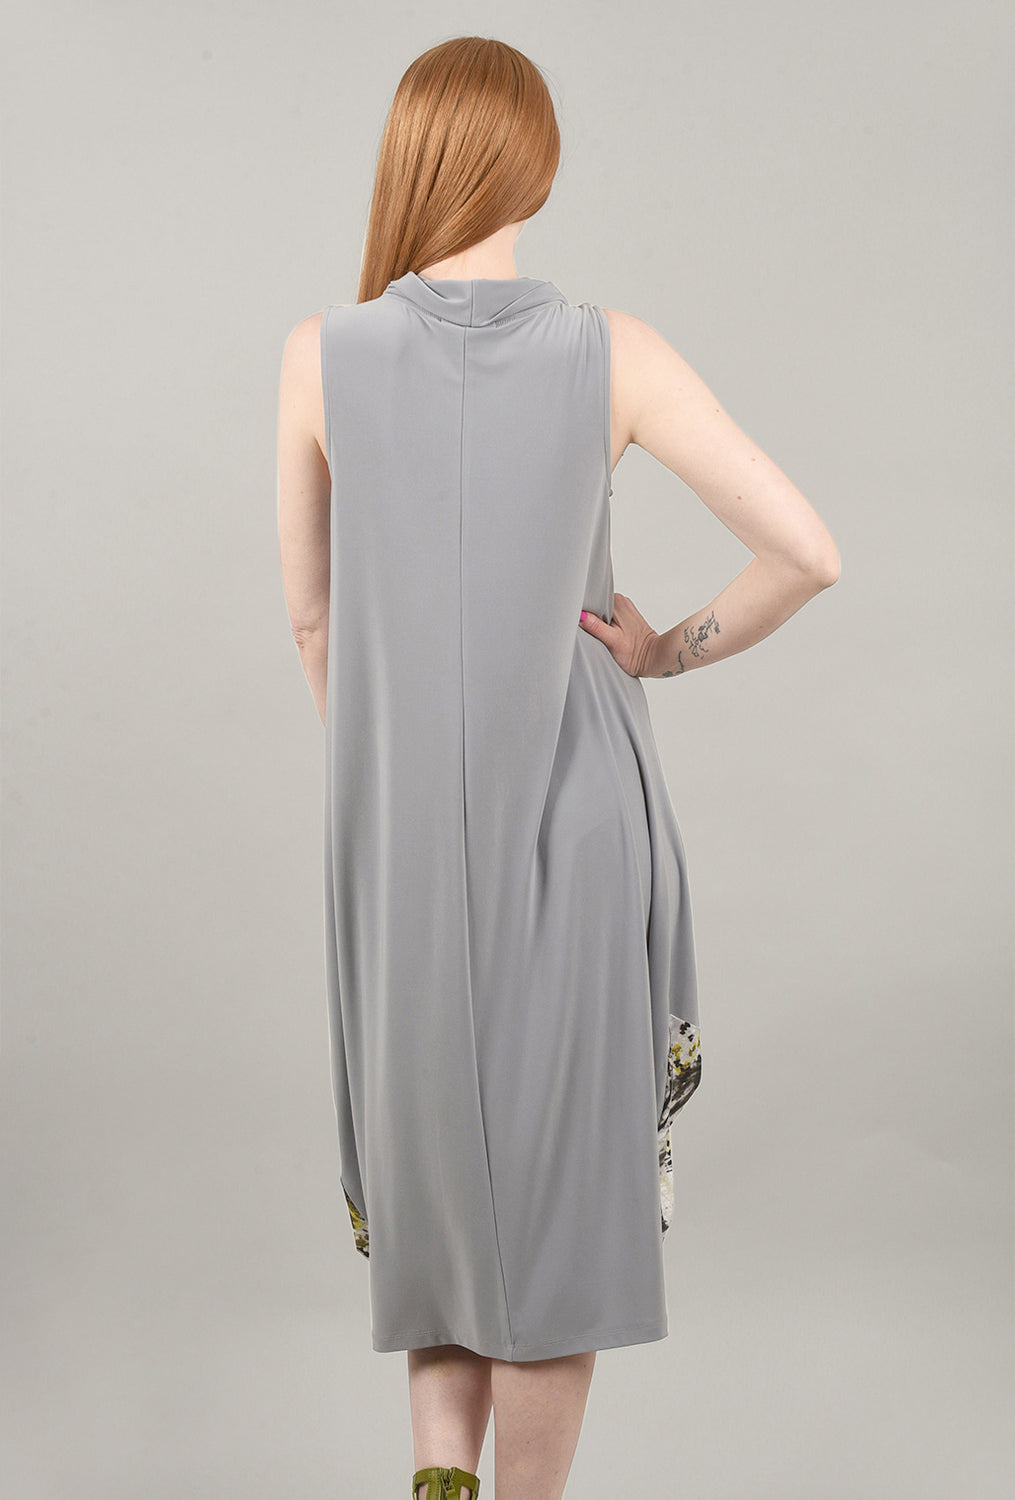 Contrast Panel Agda Dress, Silver